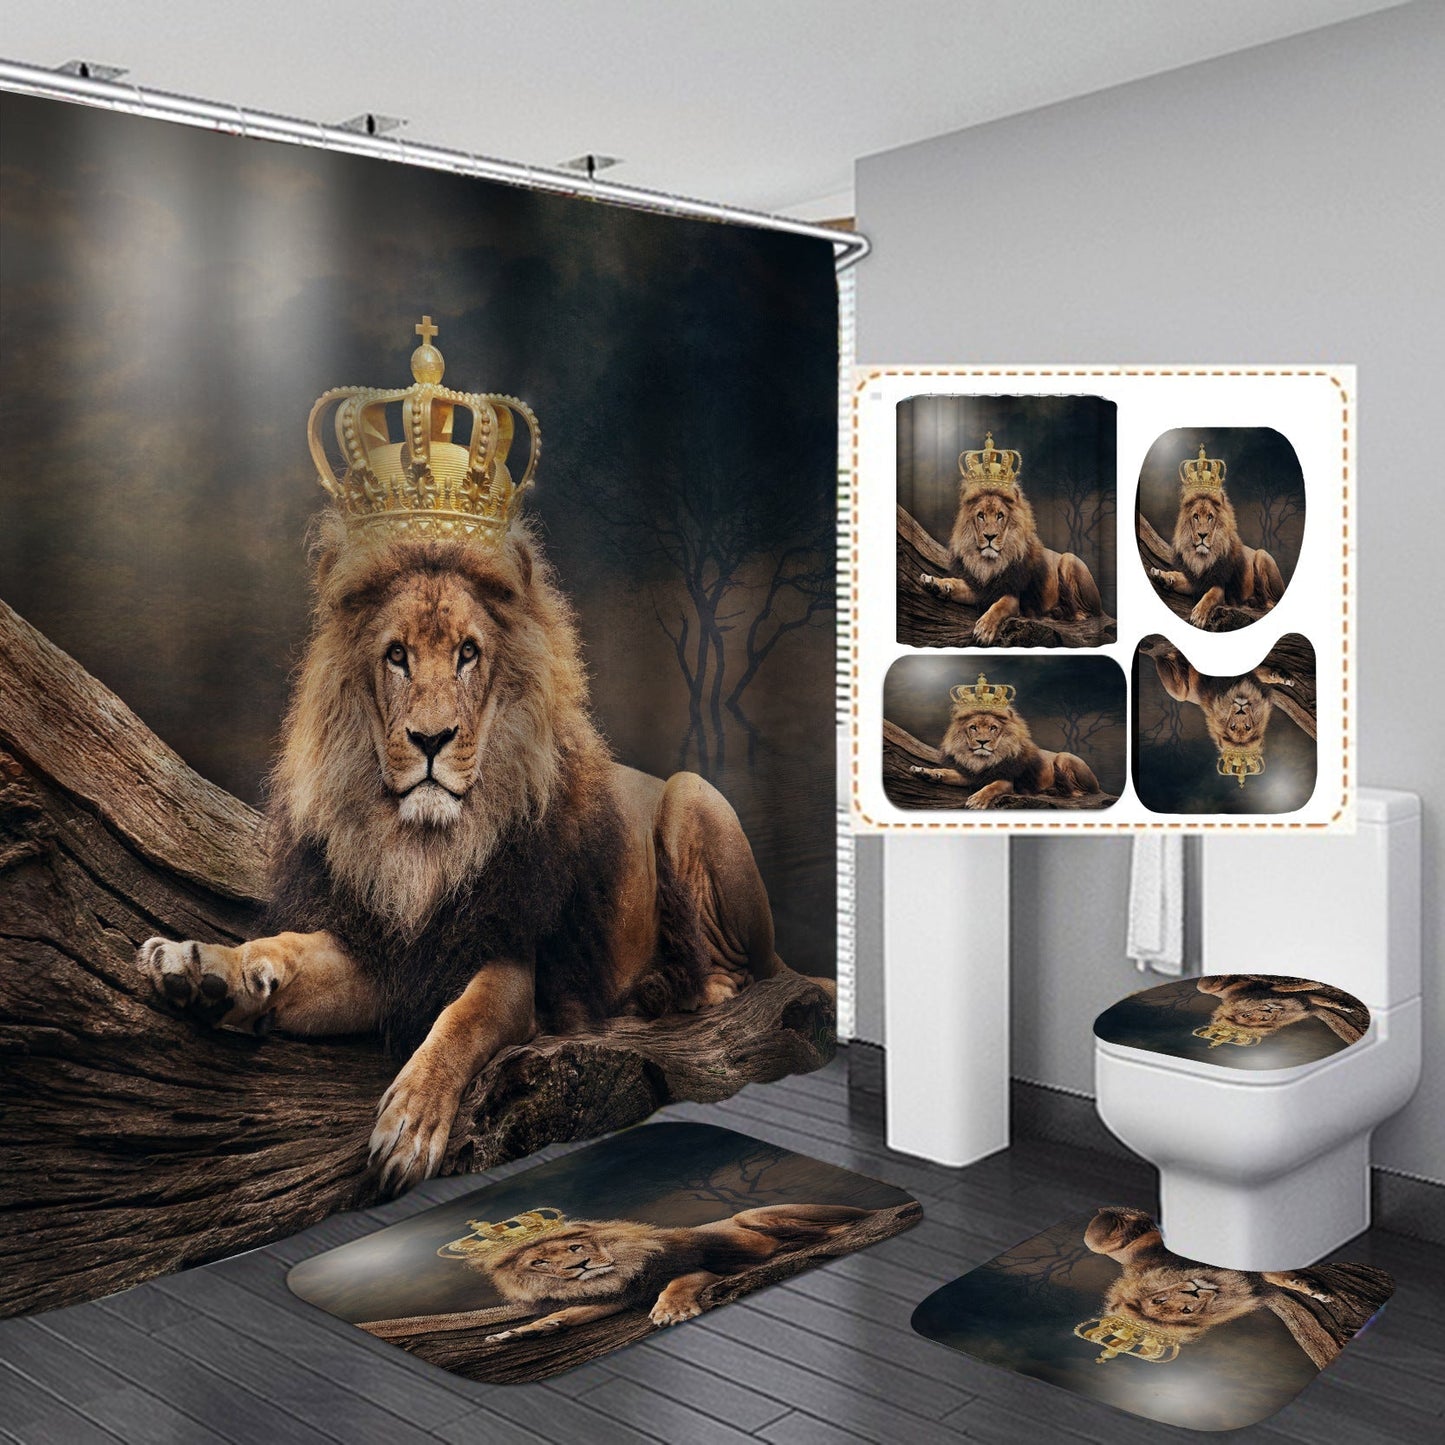 3D Lion Design Shower Curtain Bathroom SetsNon-Slip Toilet Lid Cover-Shower Curtain-180×180cm Shower Curtain Only-3-Free Shipping Leatheretro